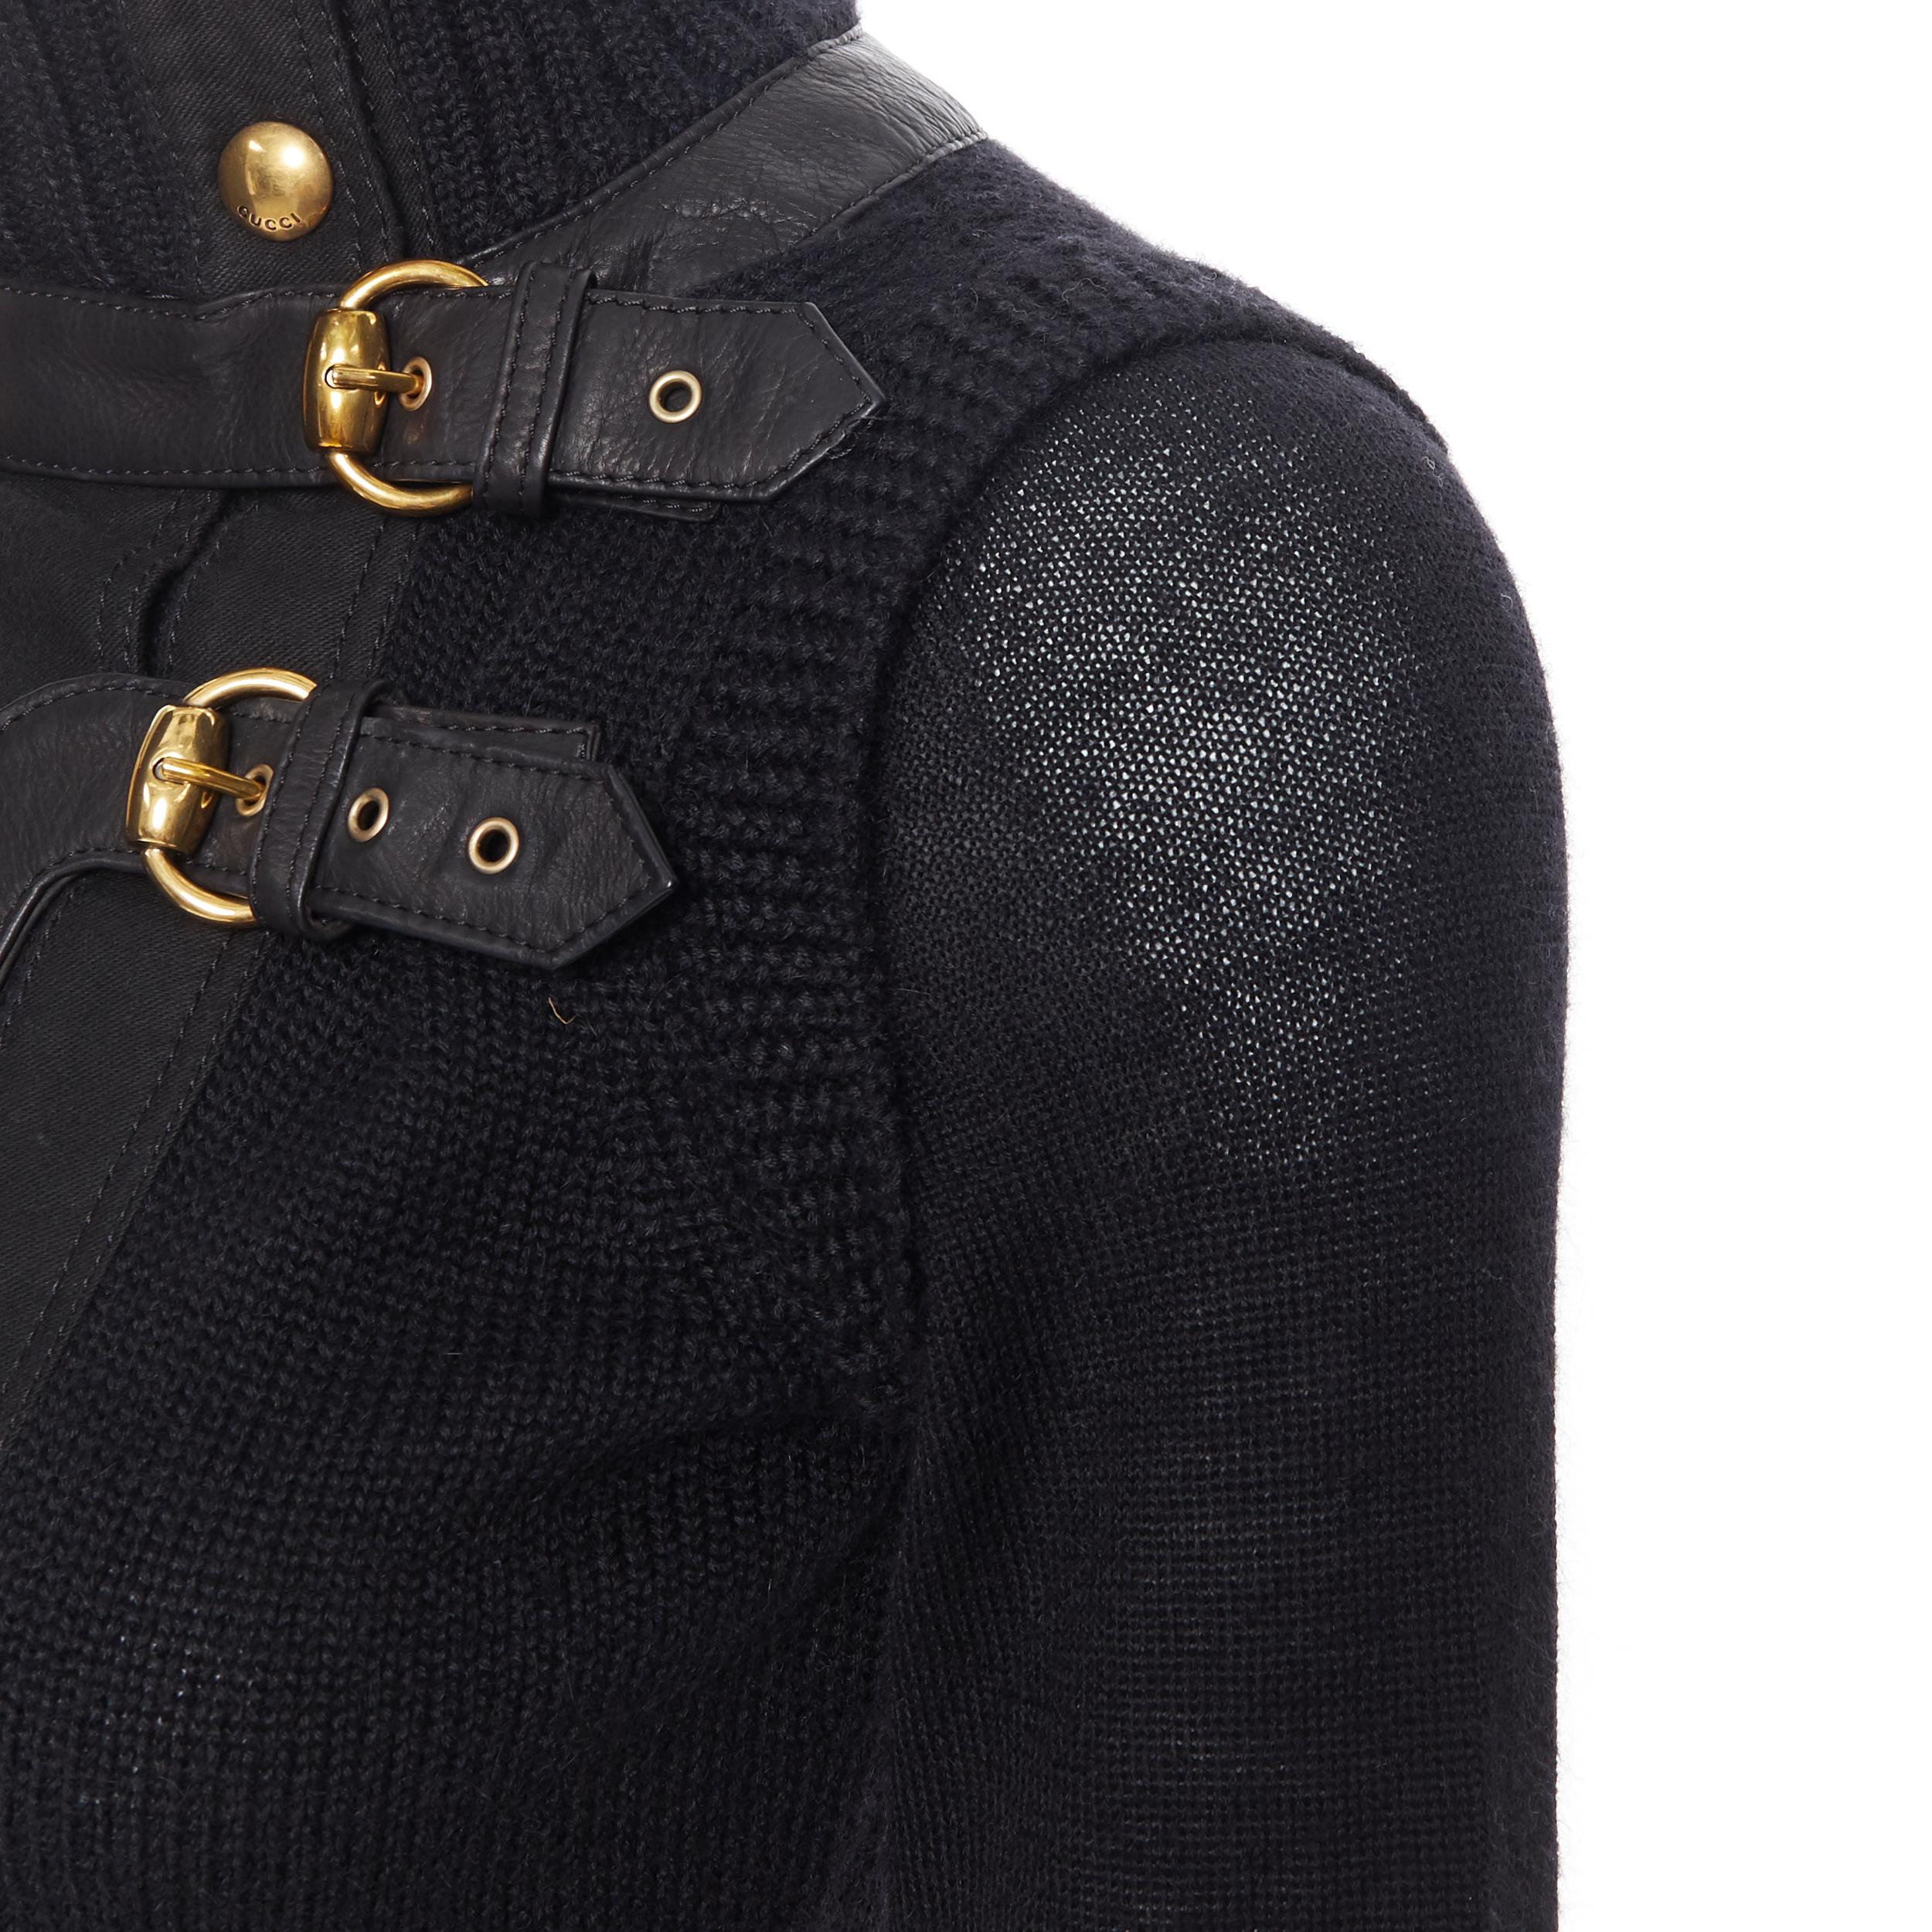 GUCCI 2008 black alpaca wool leather trimmed gold buckle turtleneck sweater XS 1